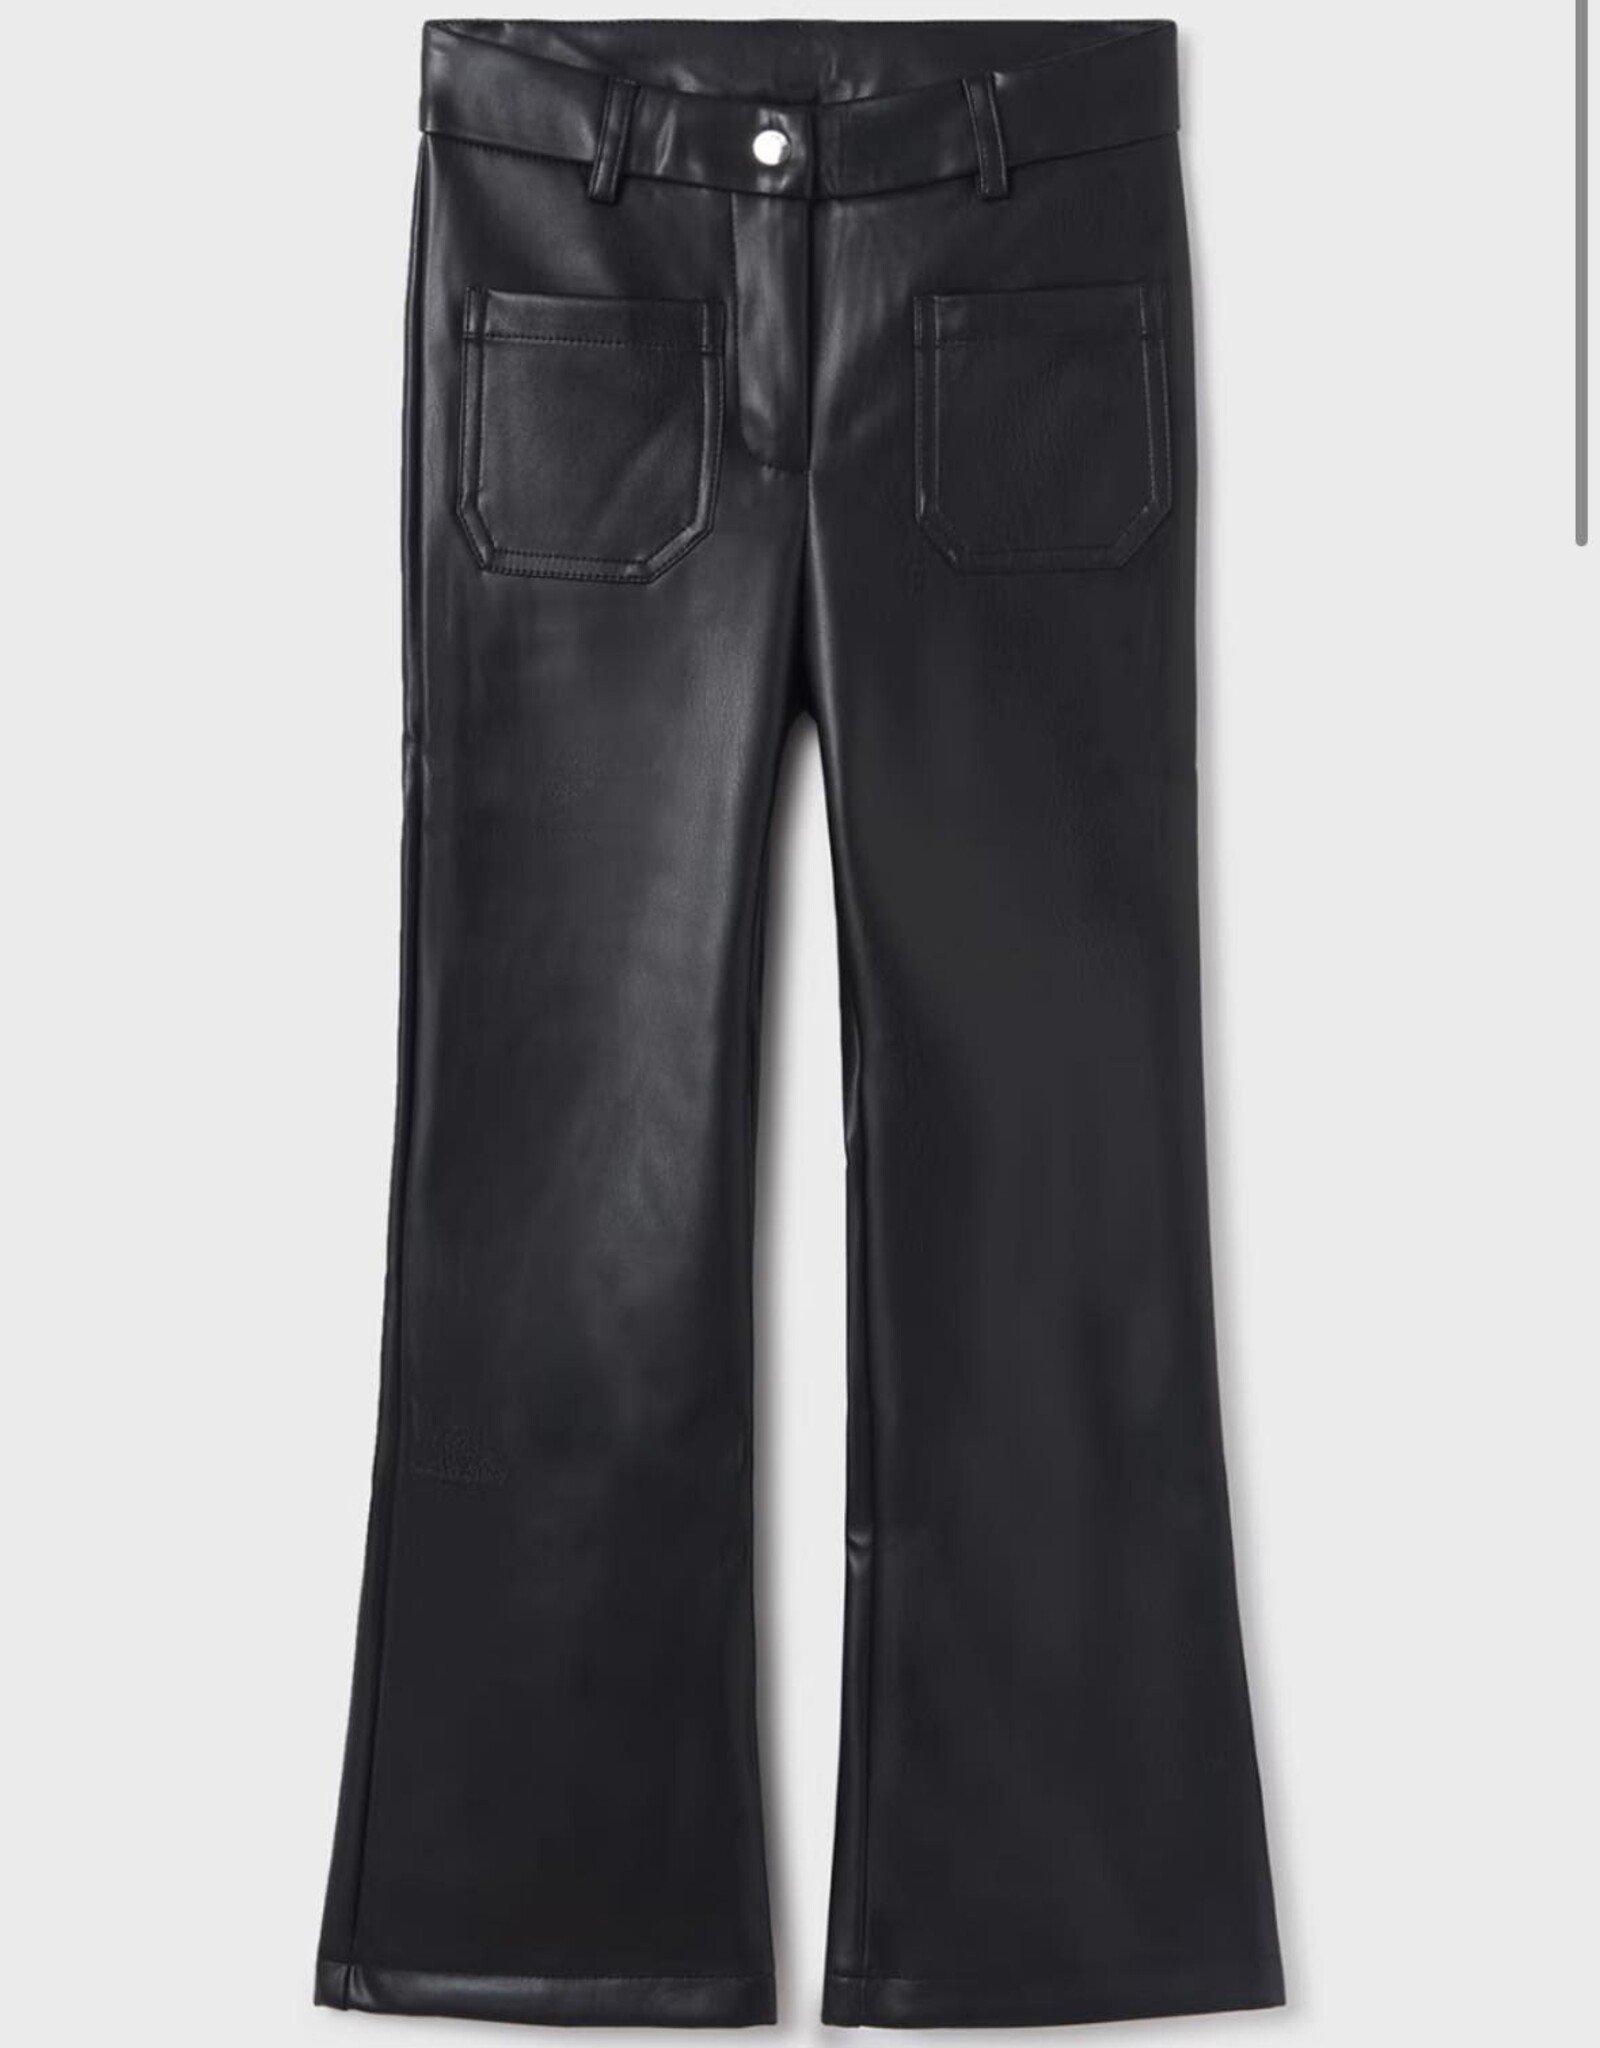 Mayoral Claire Leather Pant in Black